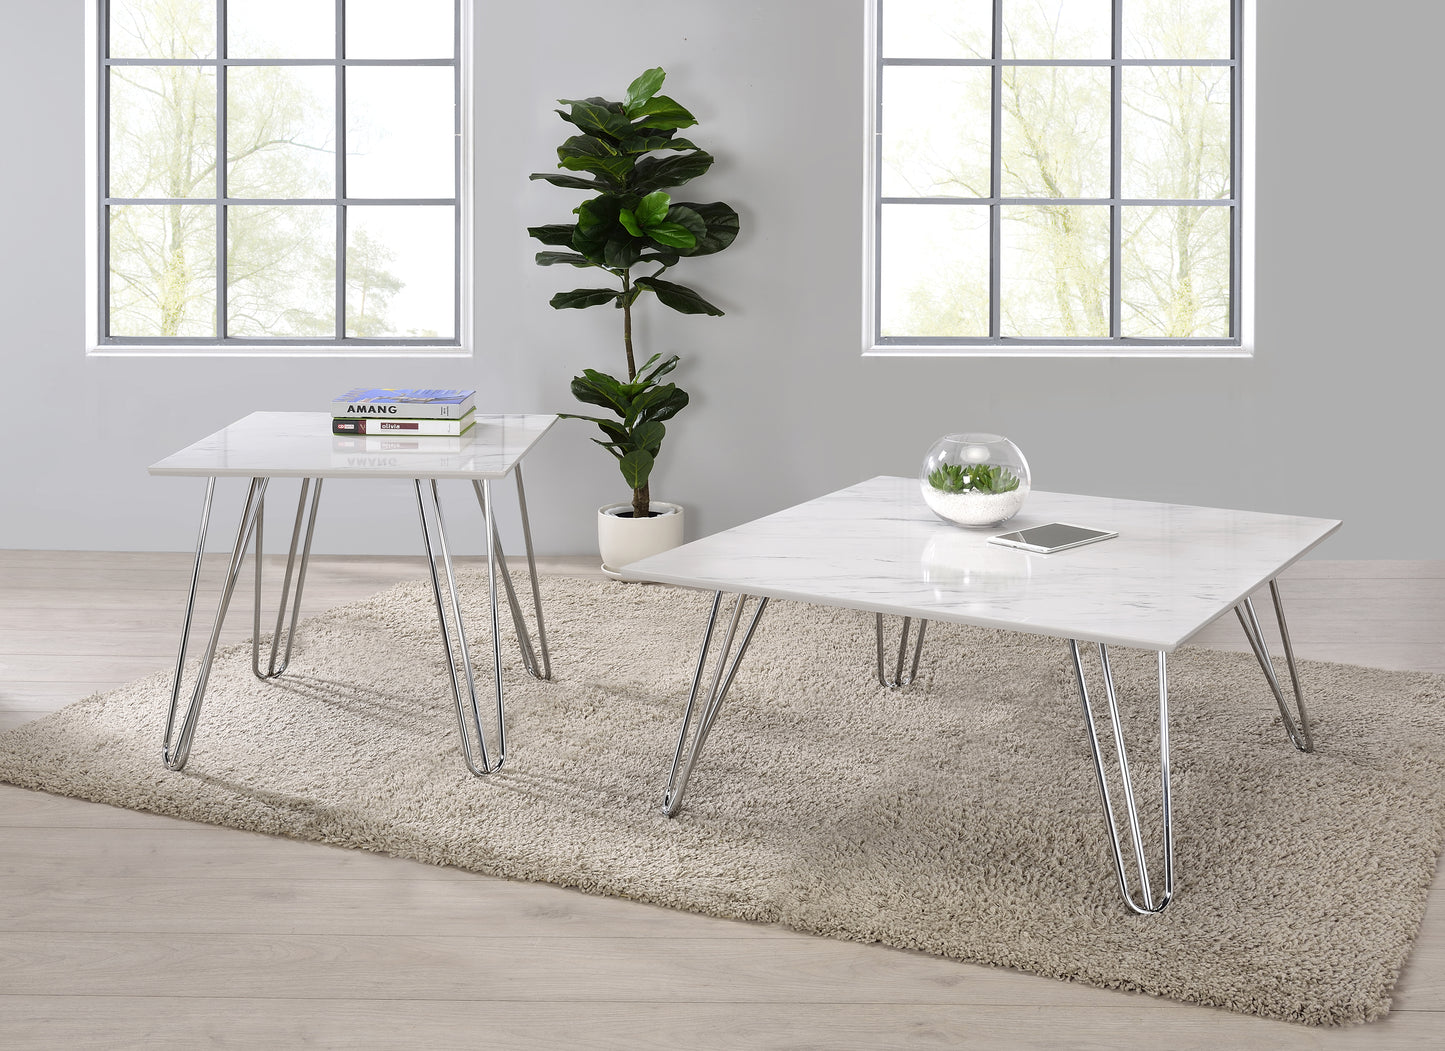 Hairpin Leg Square End Table White and Chrome